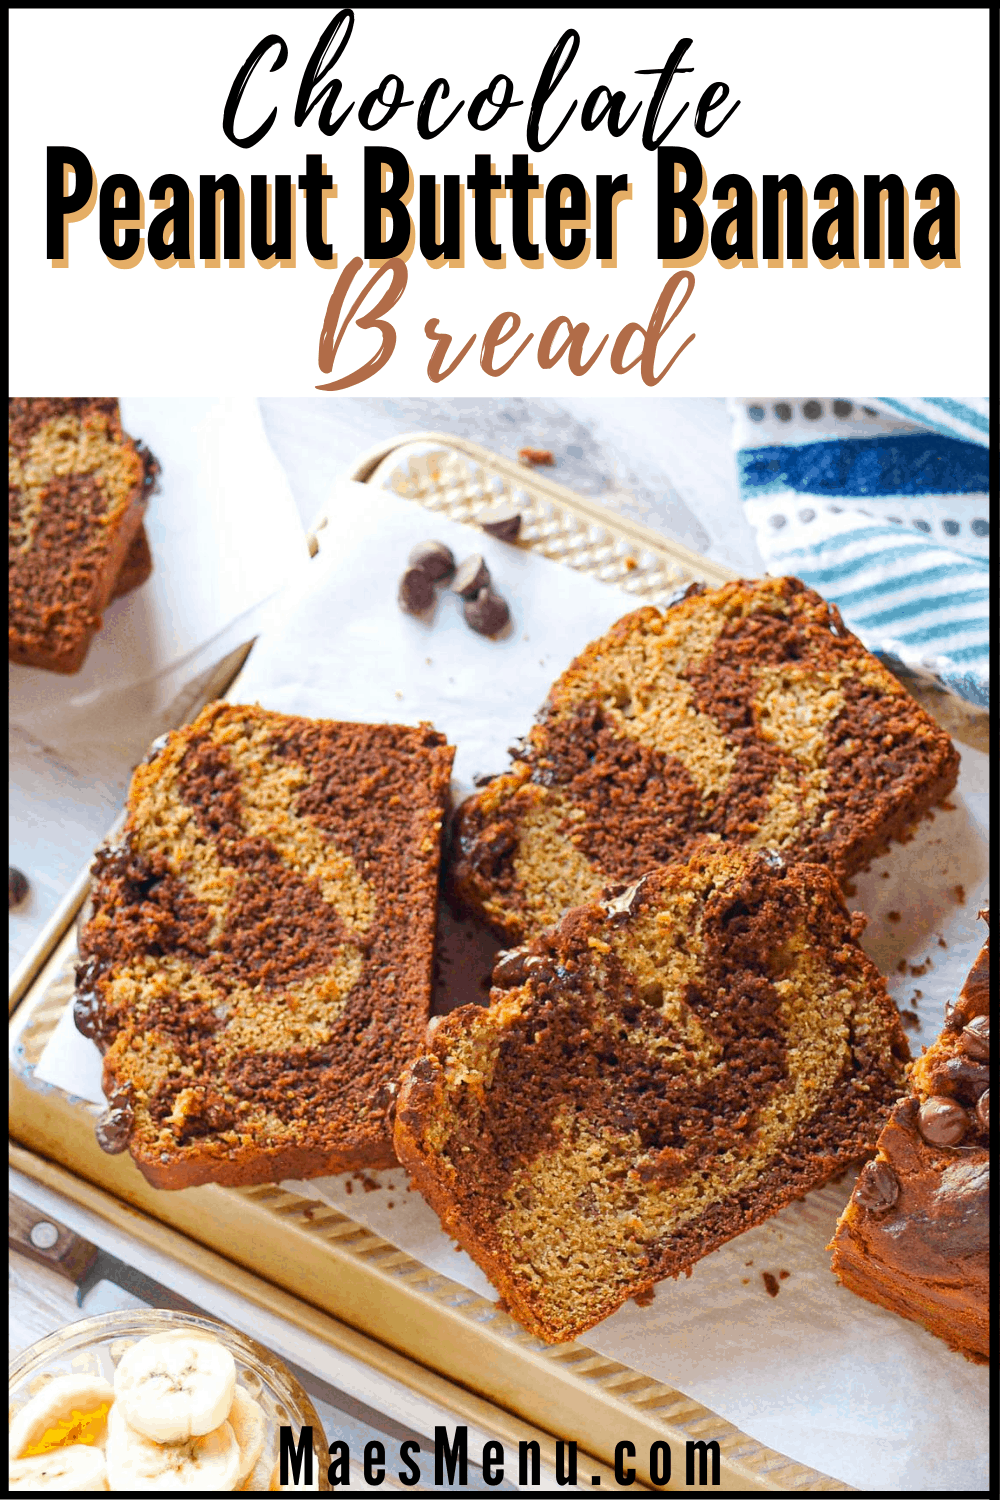 A pinterest pin for chocolate peanut butter banana bread with an overhead shot of the bread slices laying on each other